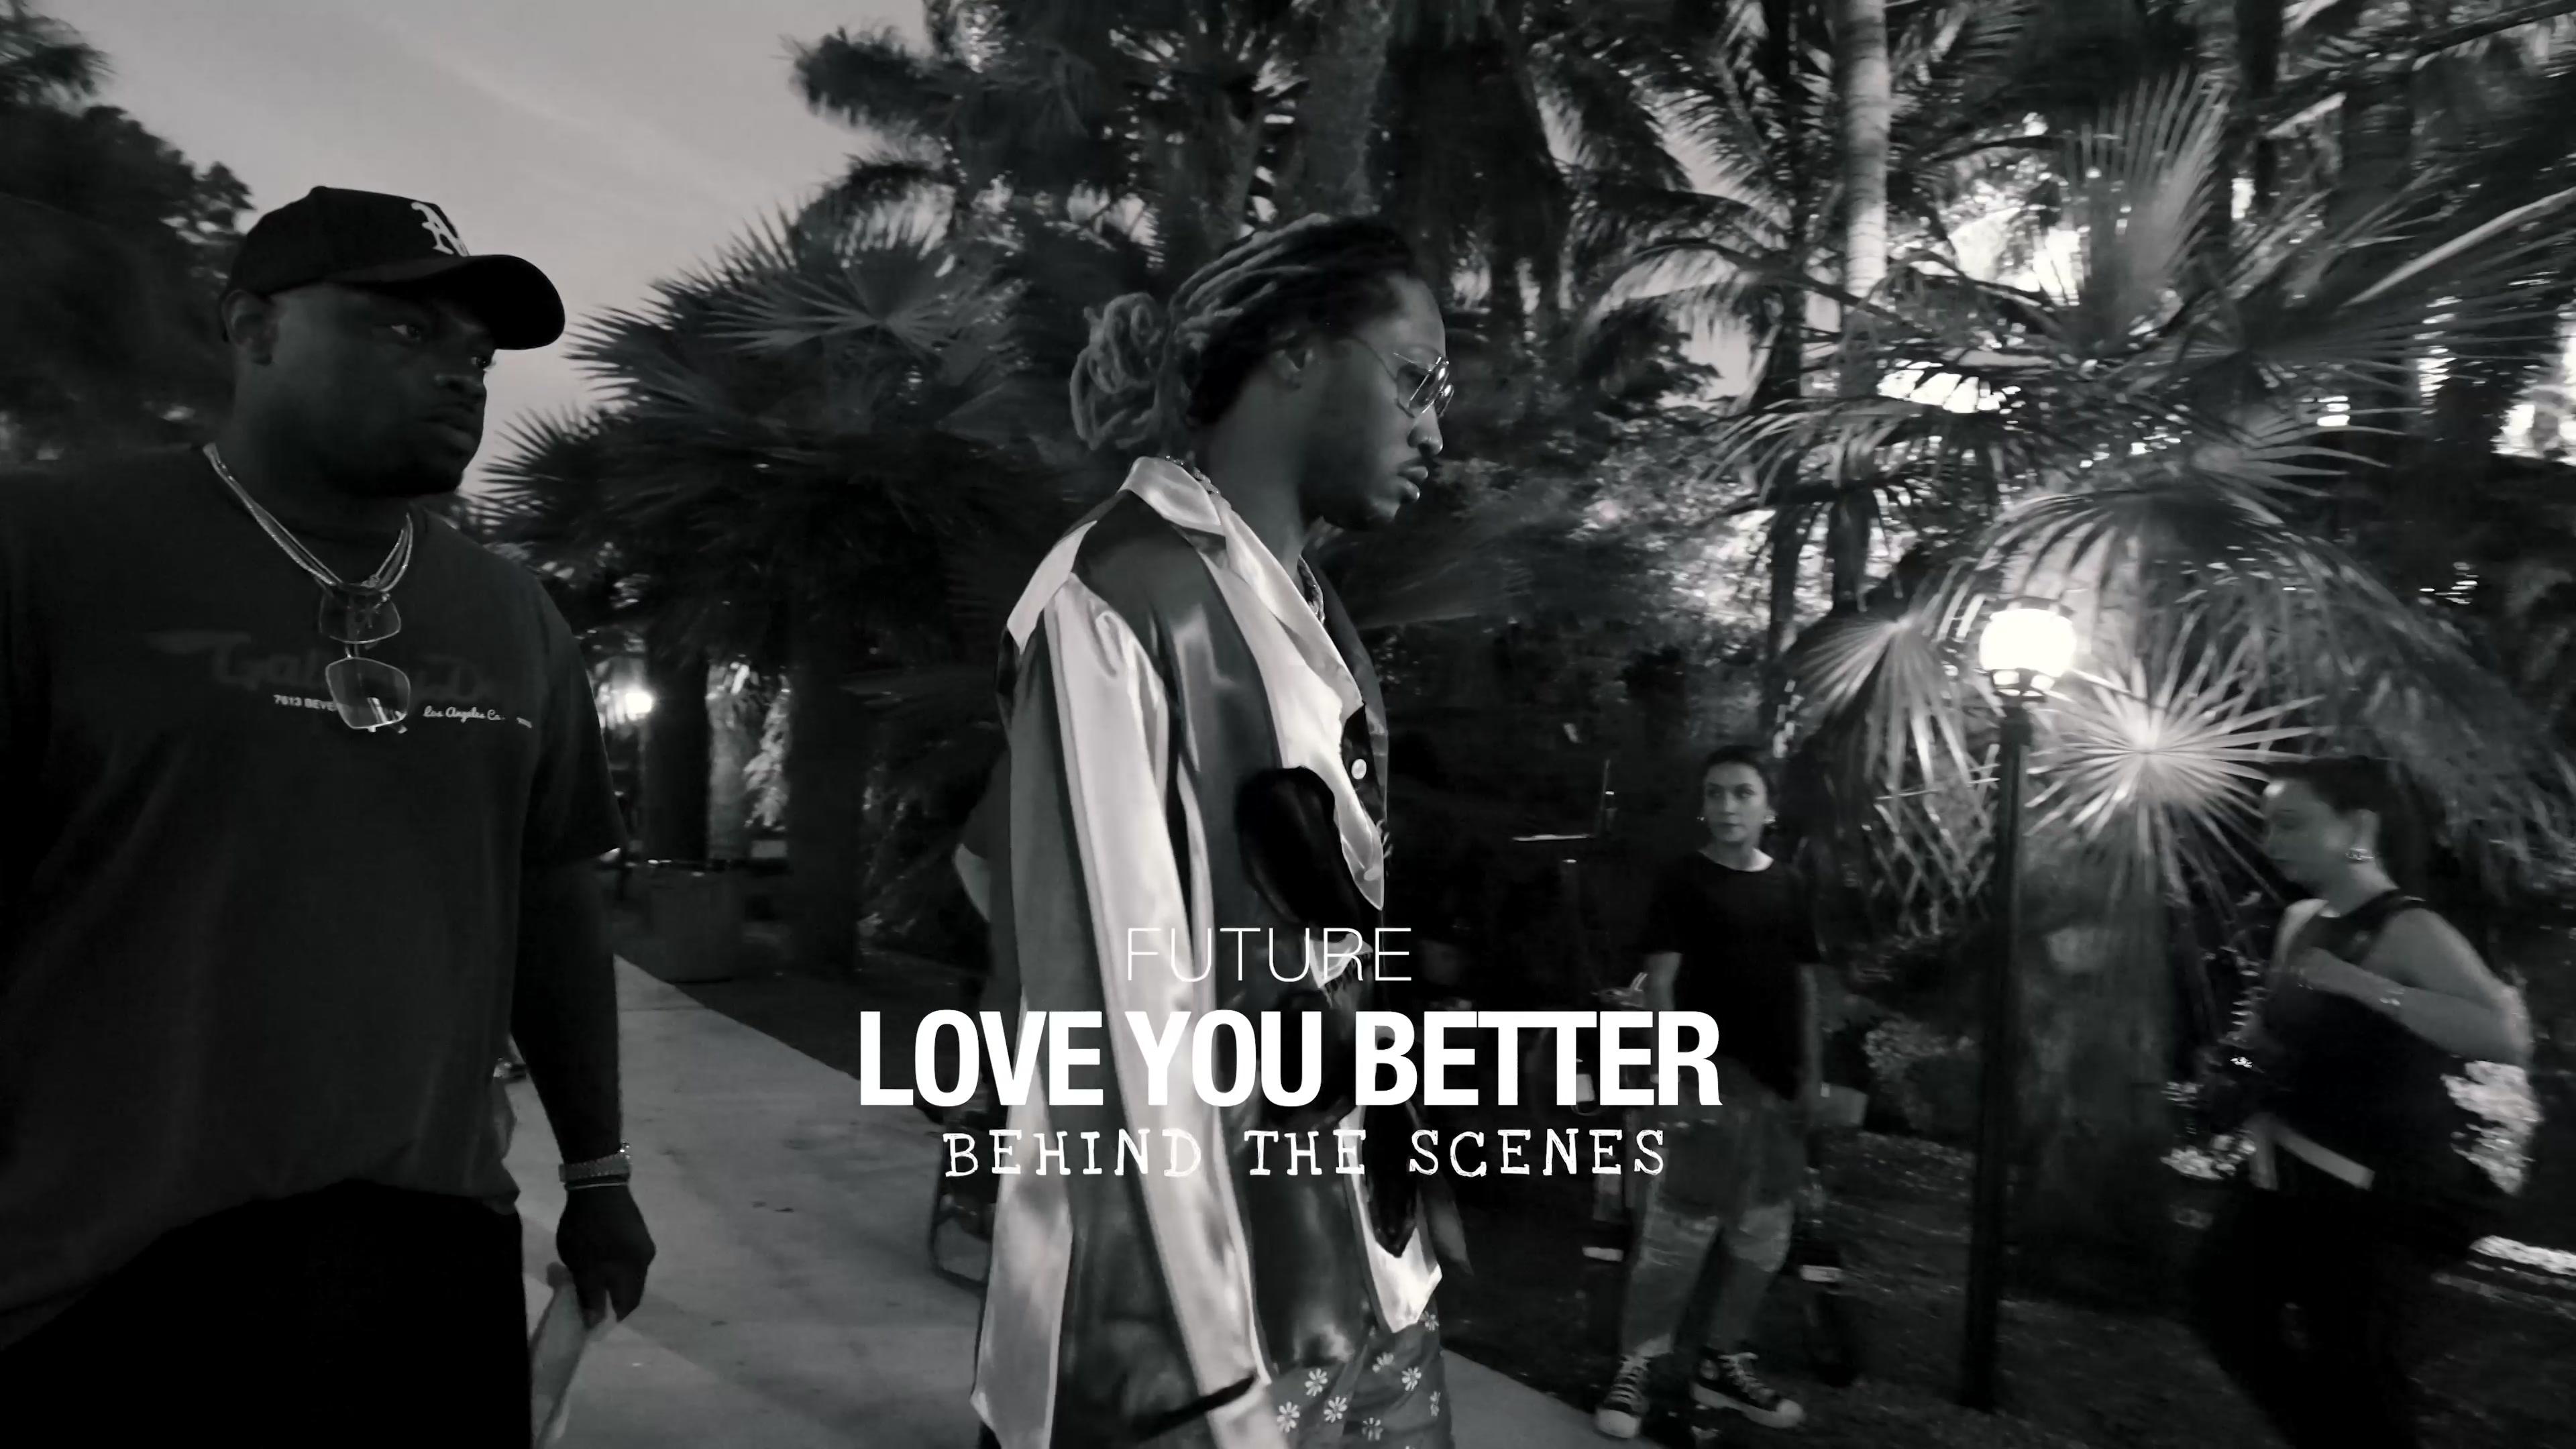 Future - LOVE YOU BETTER (Behind the Scenes Version)